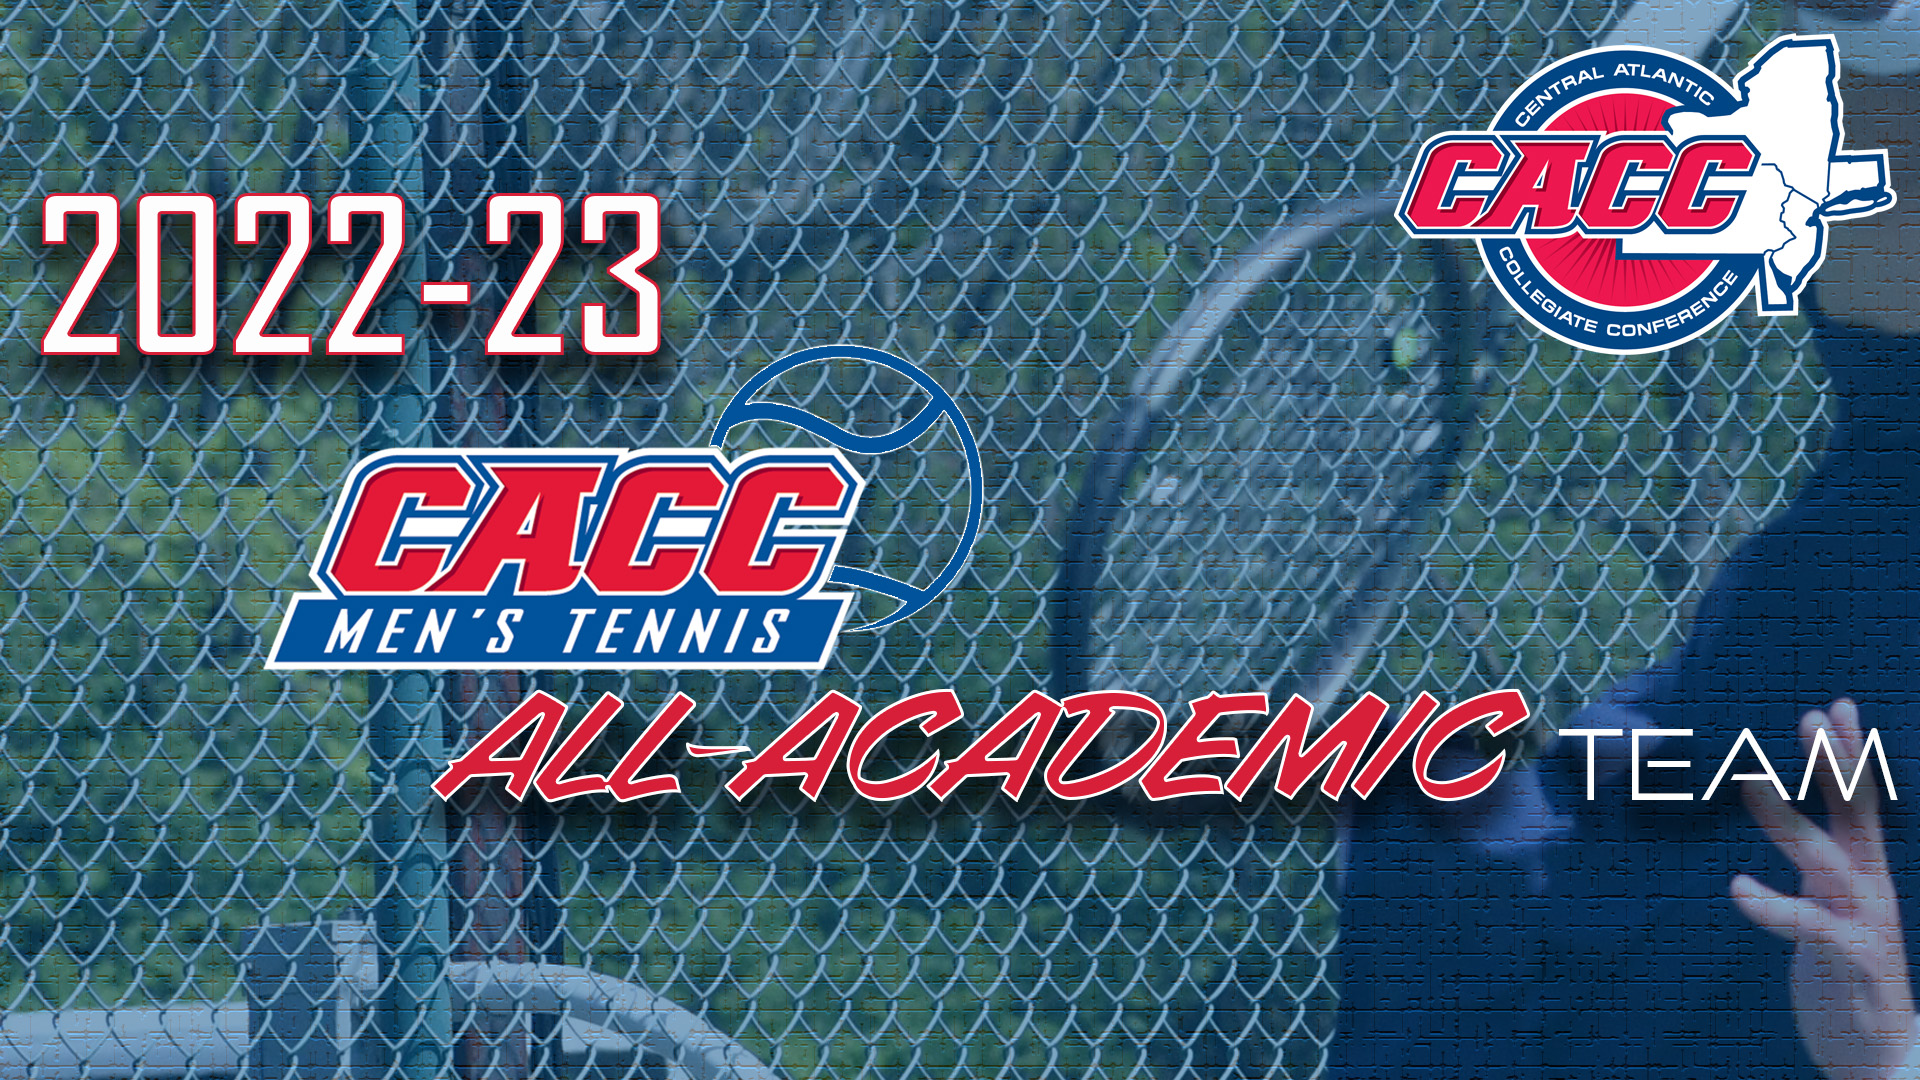 MEN'S TENNIS PLACE THREE ON CACC ALL-ACADEMIC TEAM